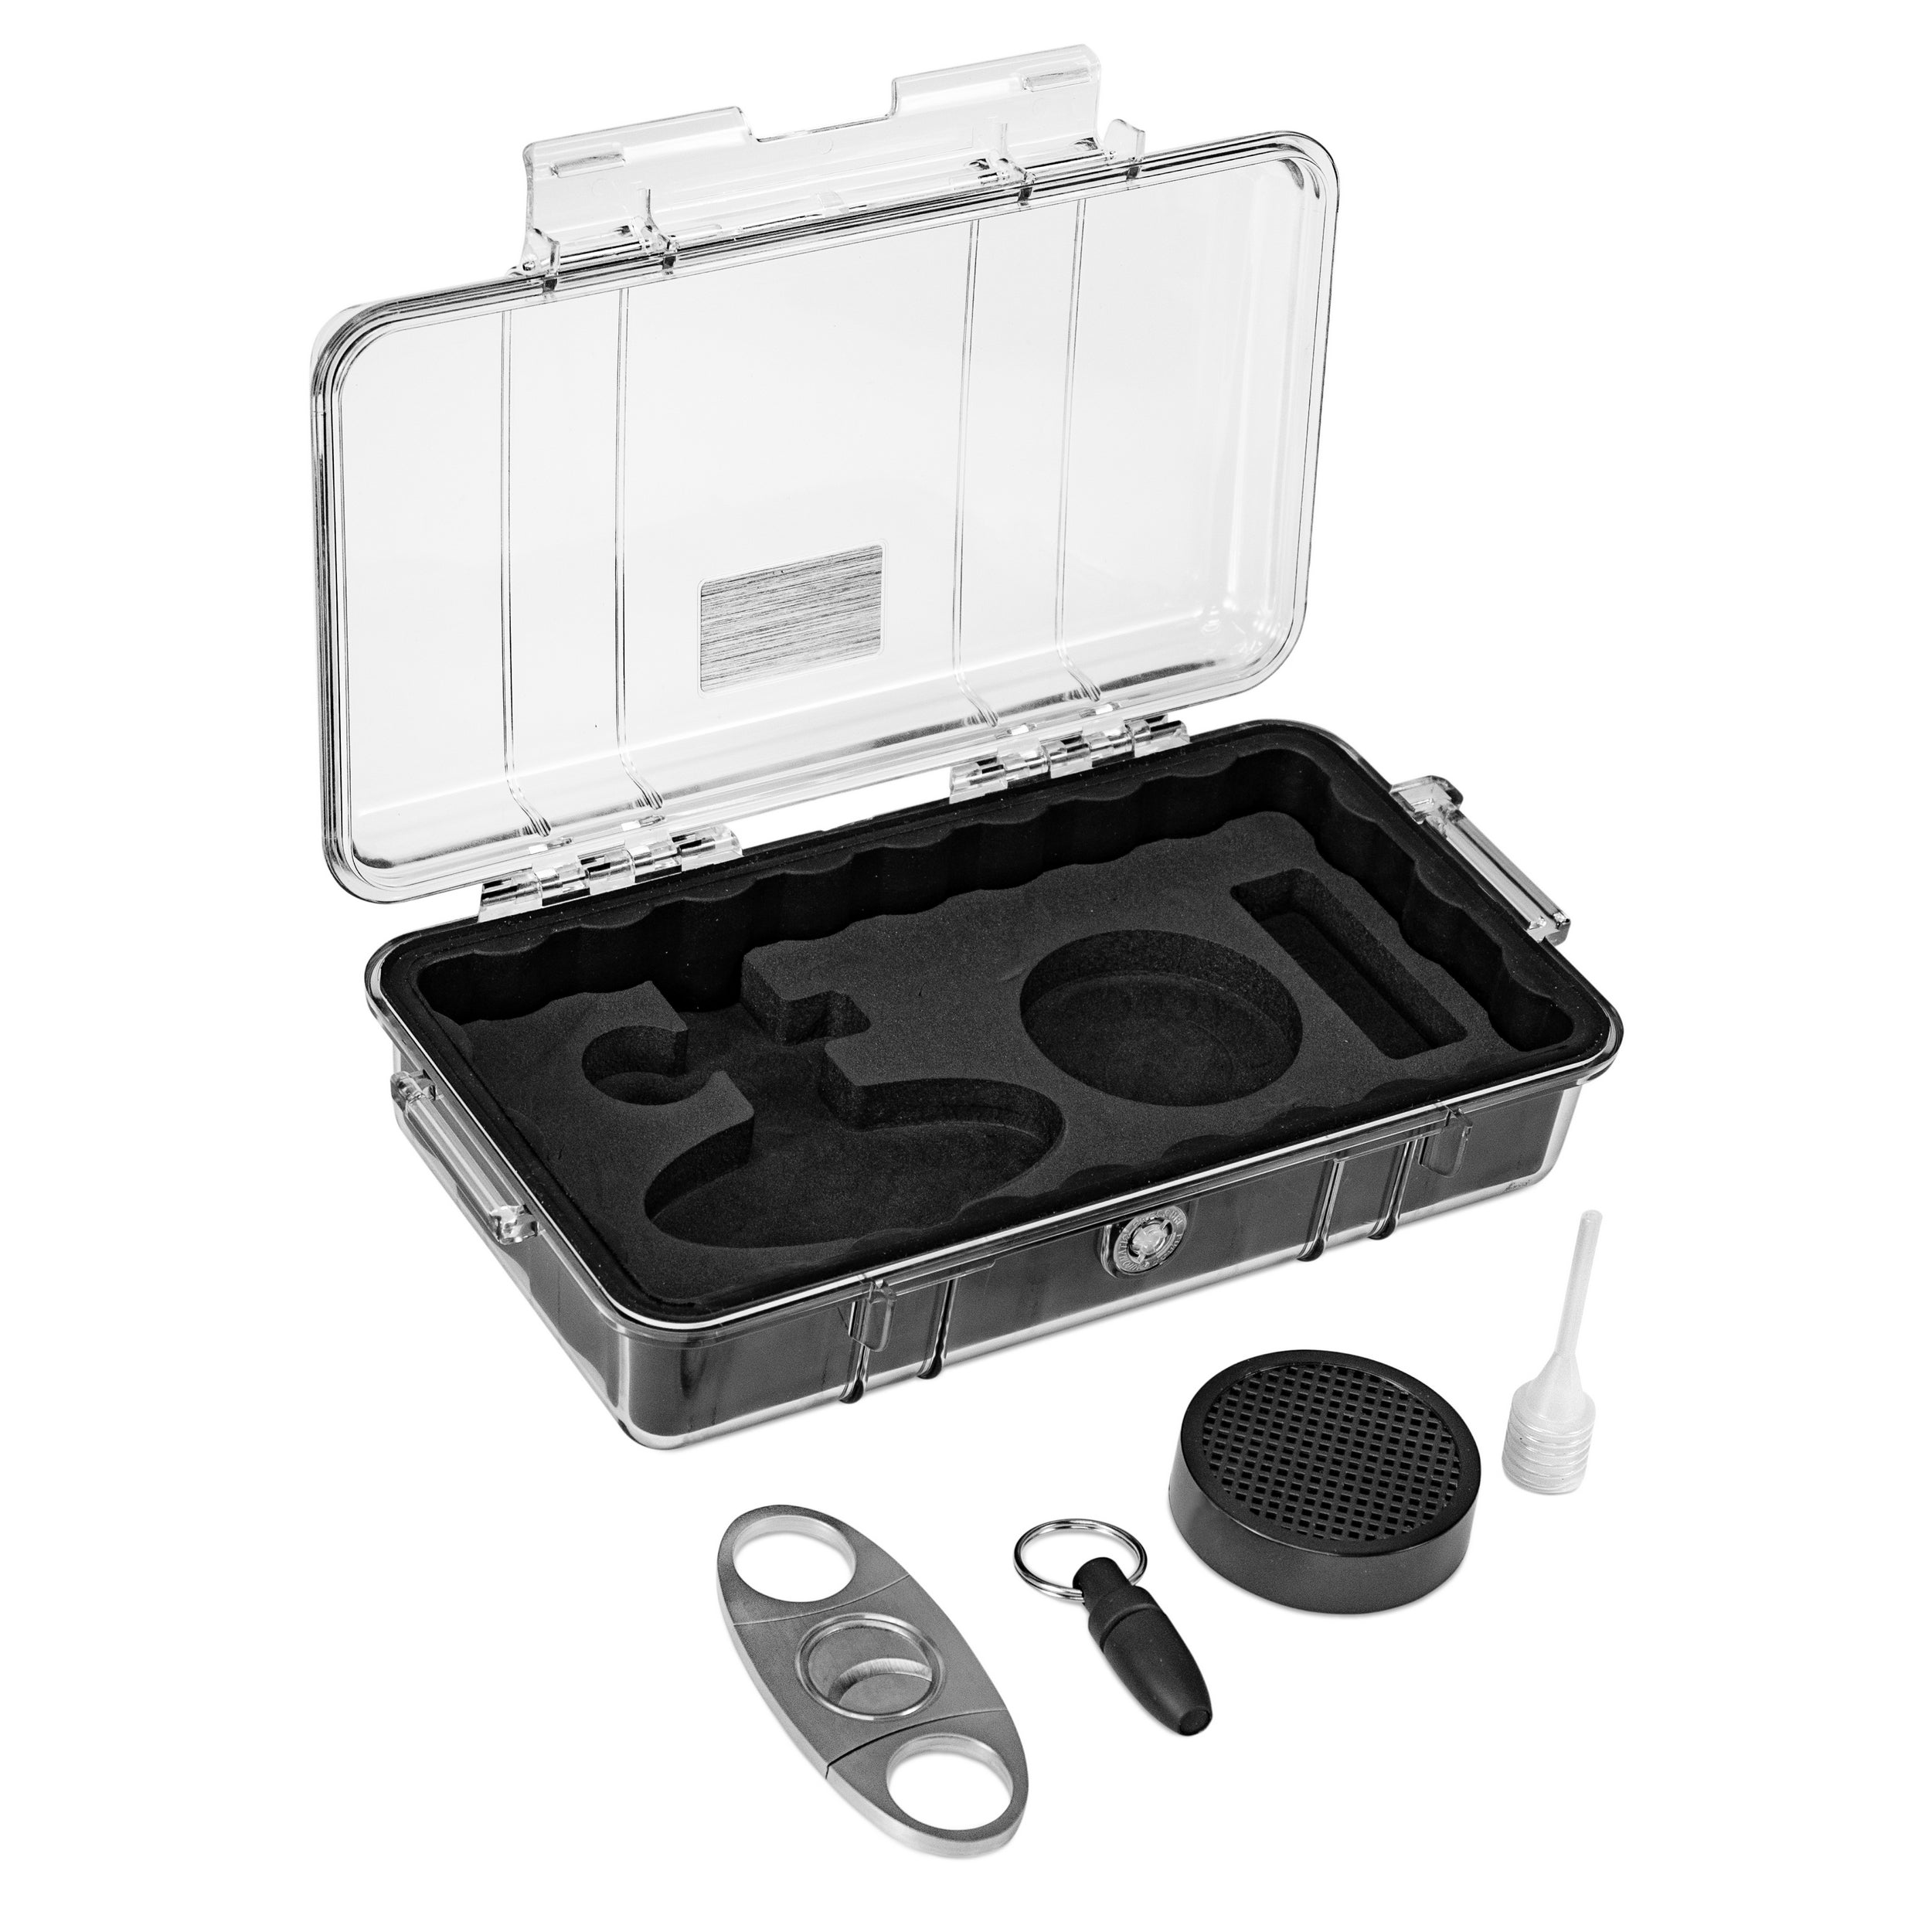 Pelican CasePro Cigar Case with Accessories